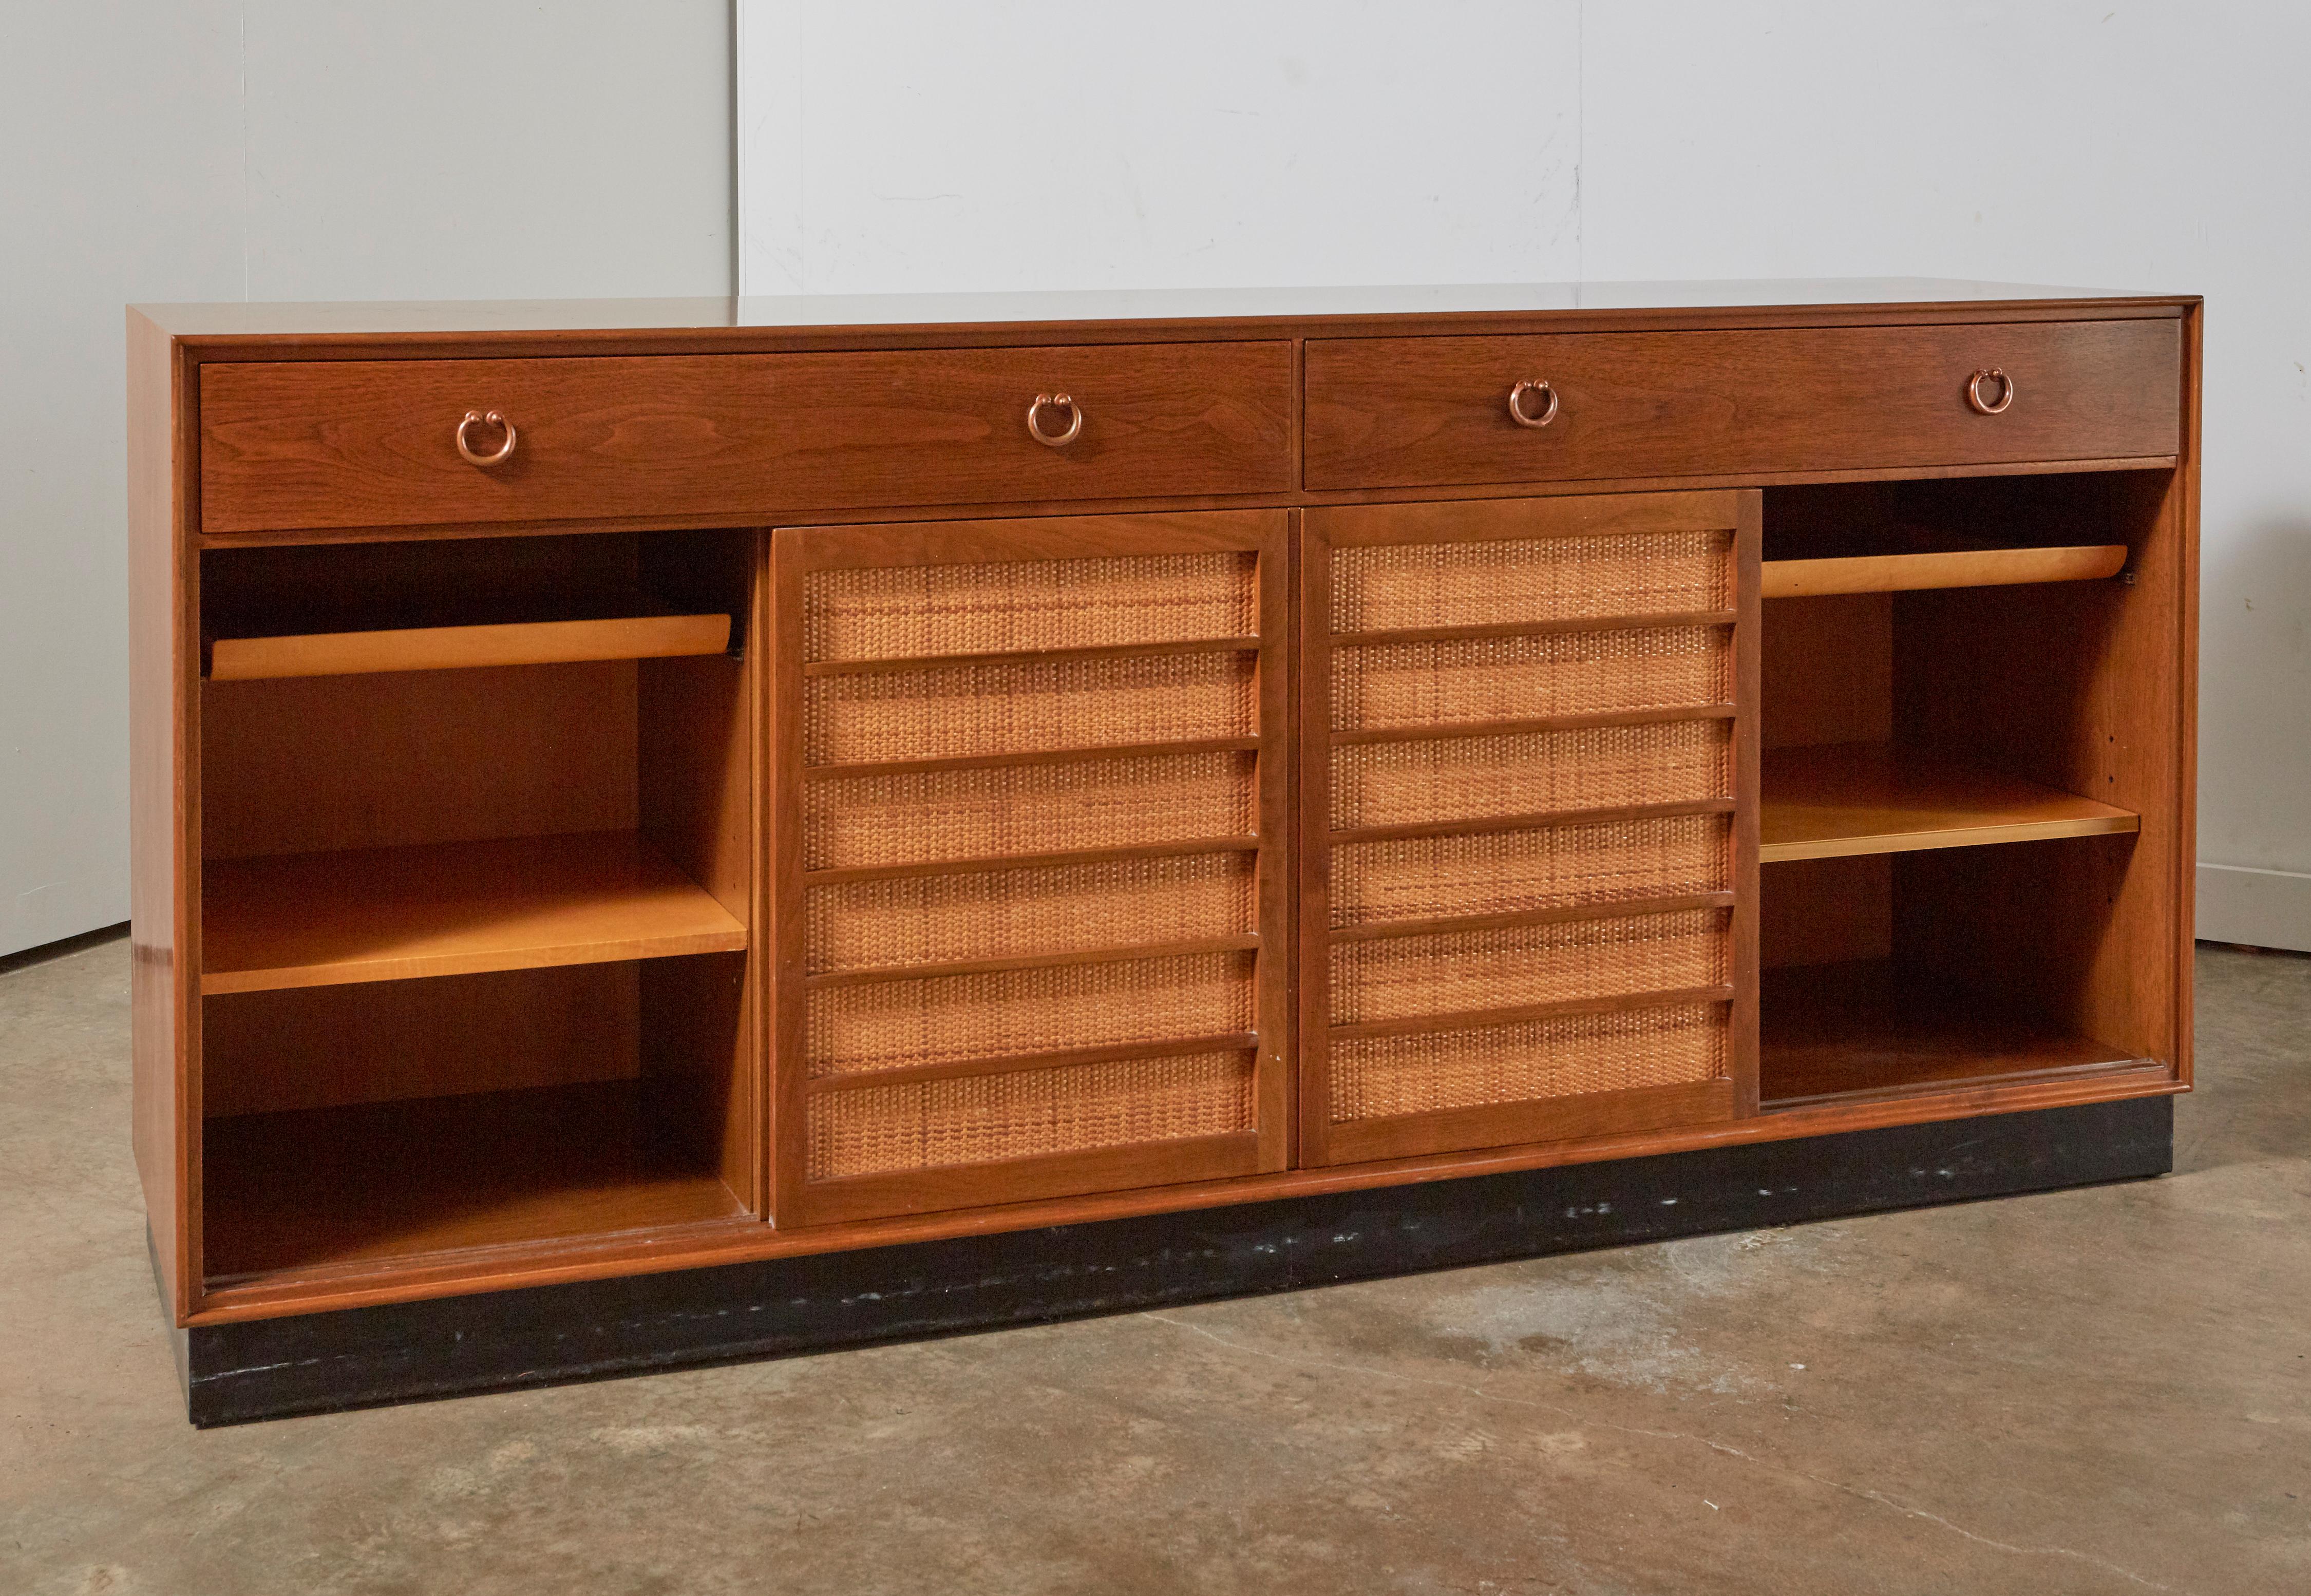 A mahogany and cane fronted sliding door credenza by Ed Wormley for Dunbar. Excellent vintage condition with elegantly caned panel sliding doors showing little to no wear, and boasting unusual copper hanging ring pulls. Two drawers at top with four